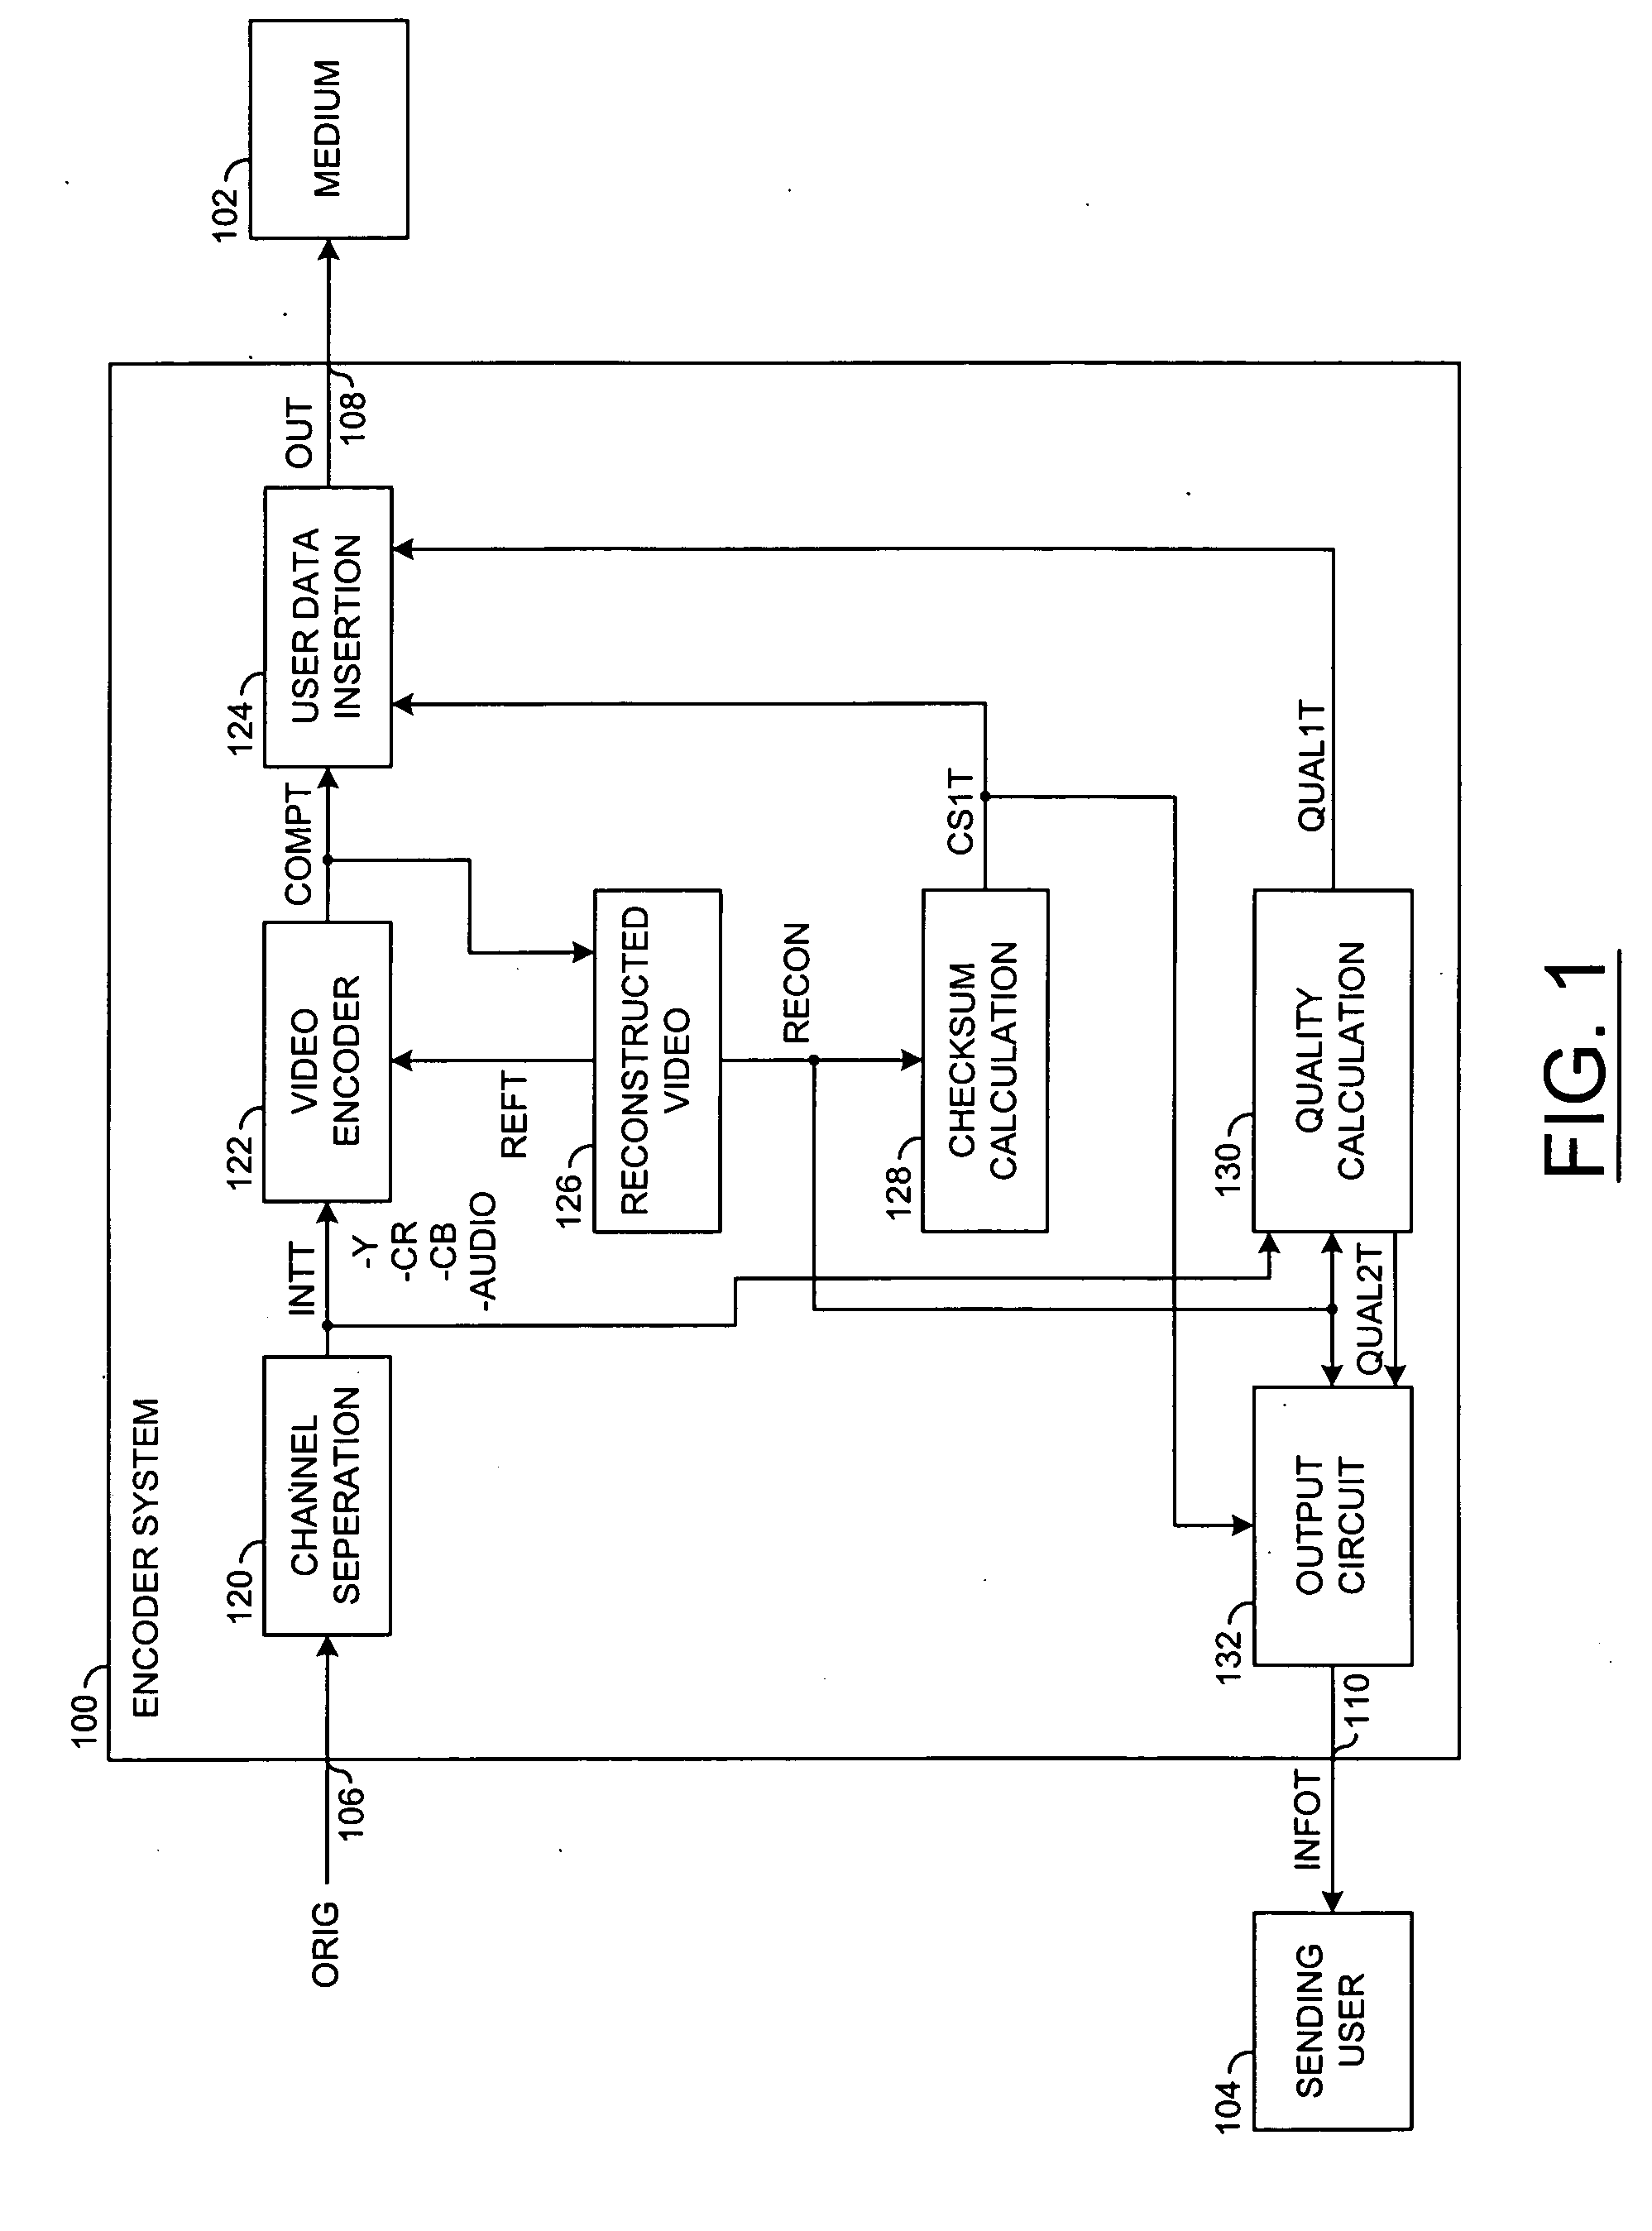 Embedded picture PSNR/CRC data in compressed video bitstream